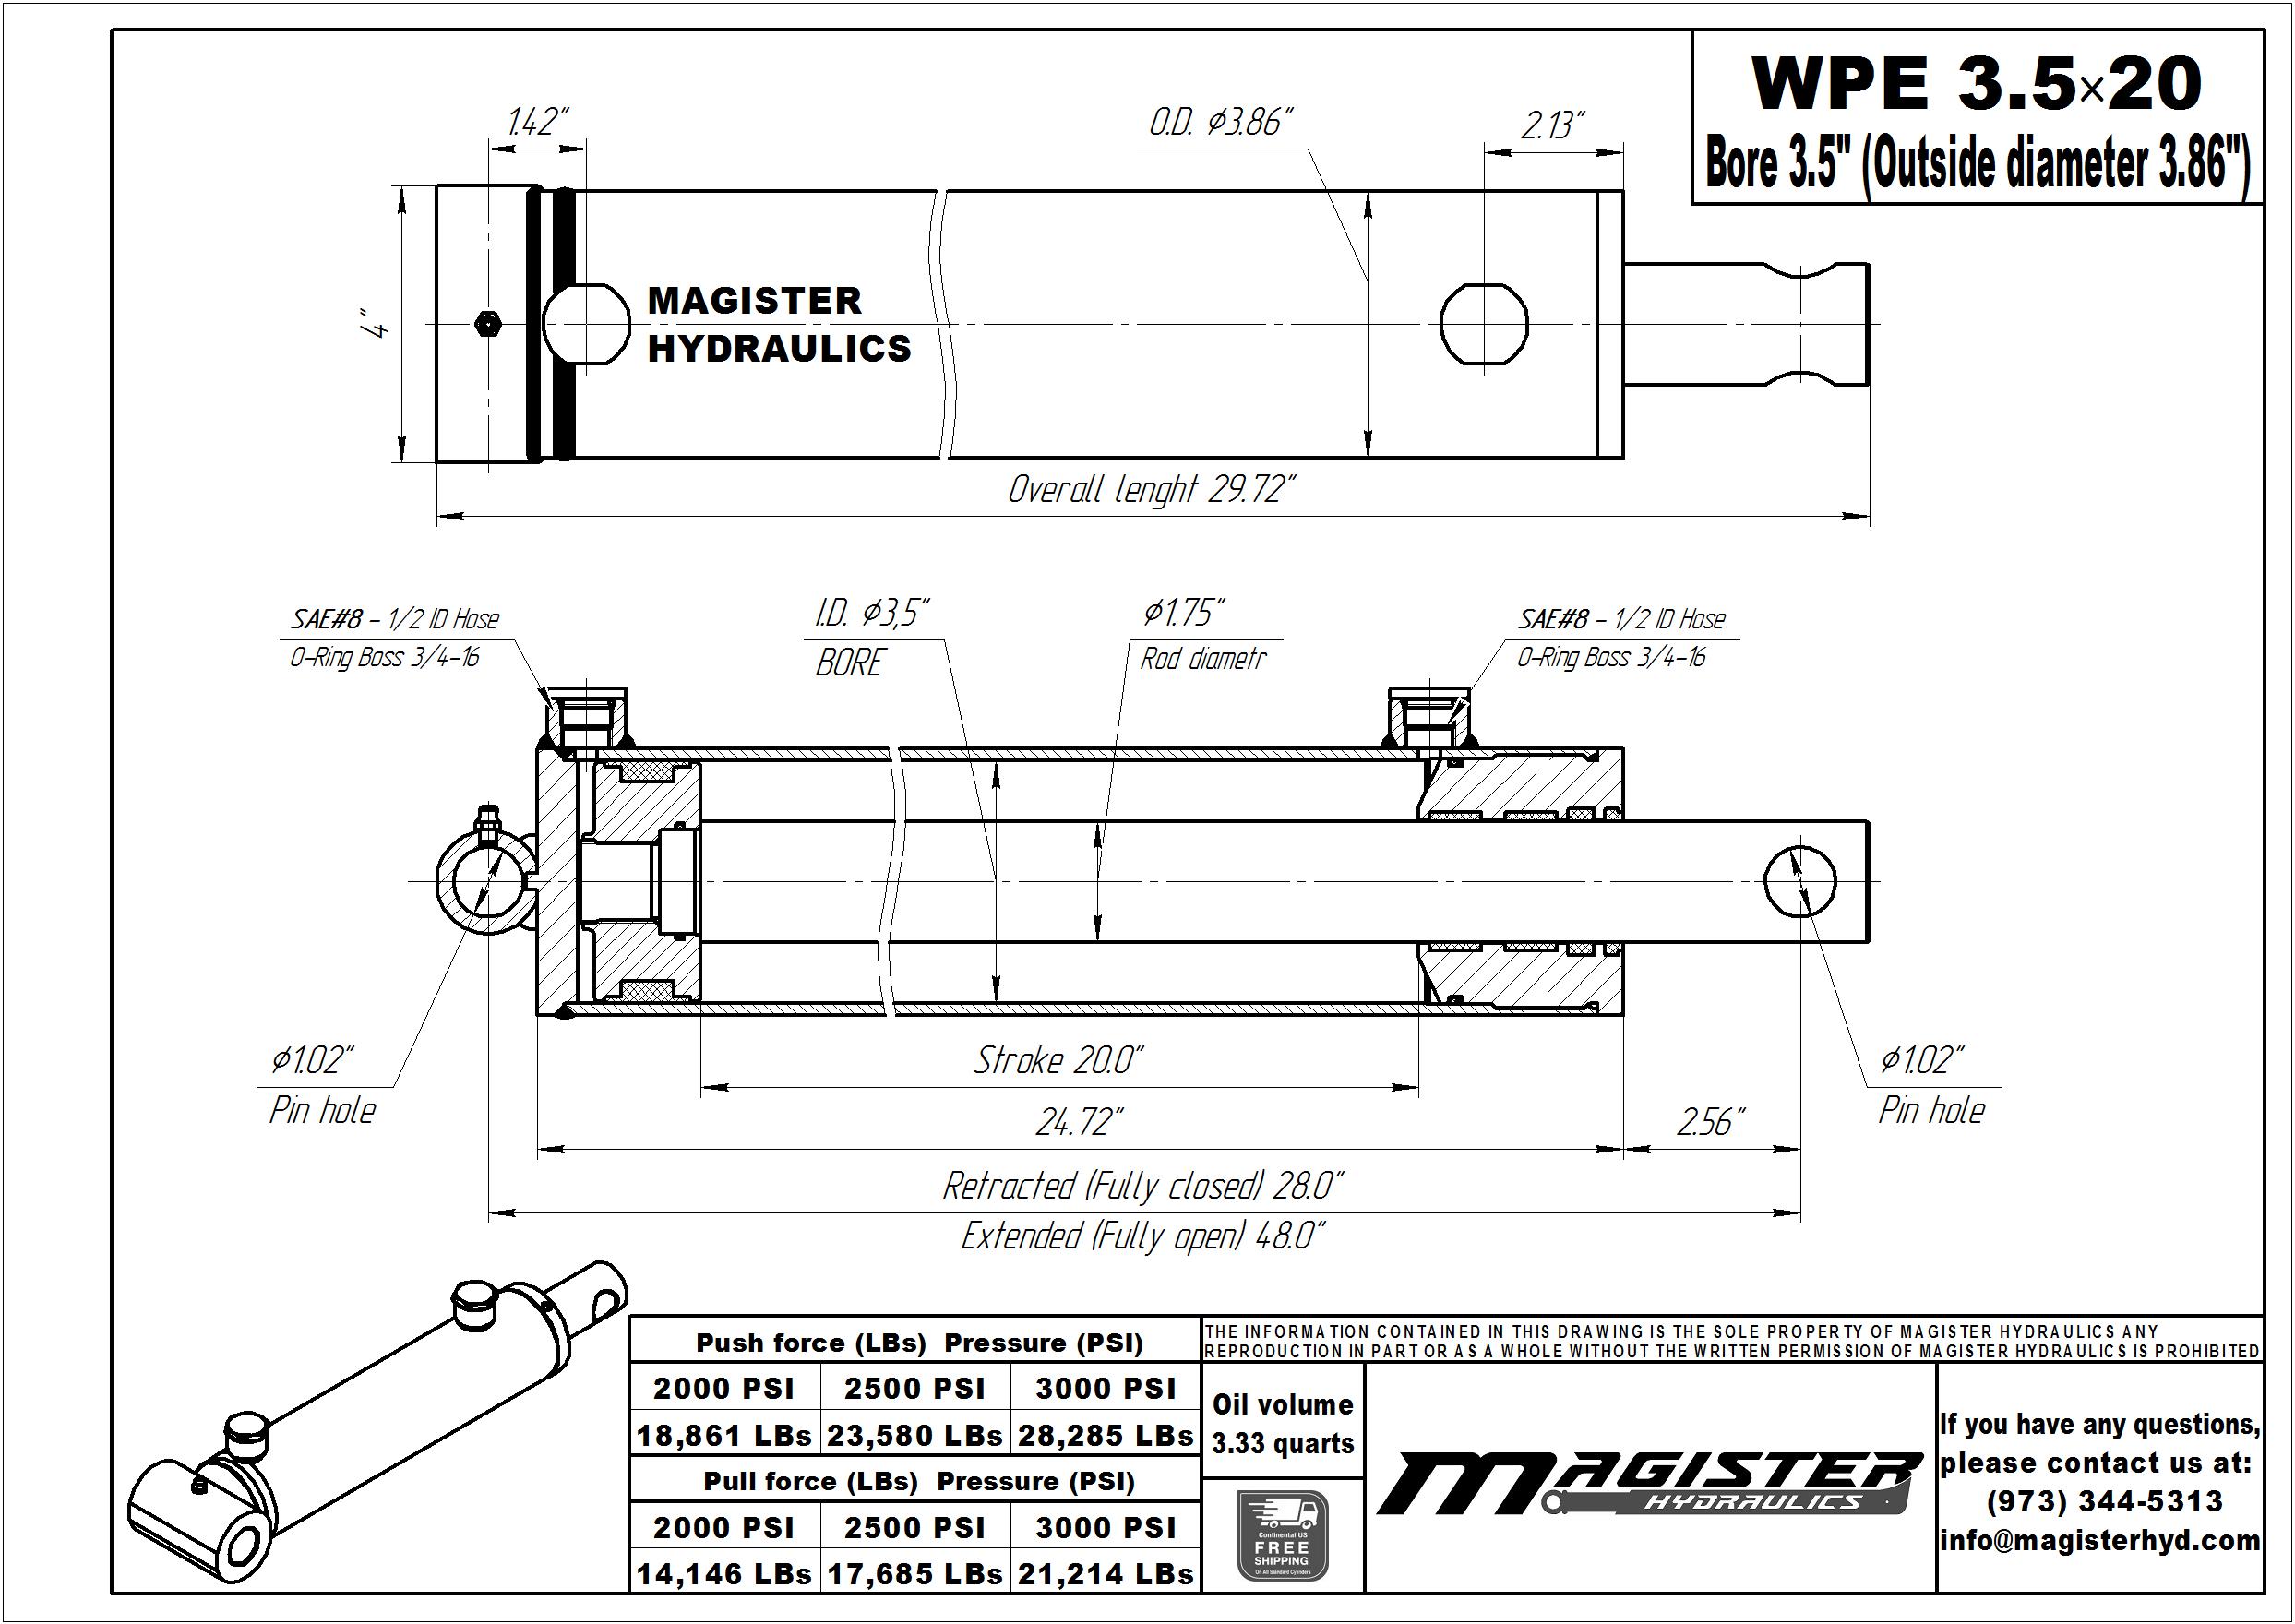 3.5 bore x 20 stroke hydraulic cylinder, welded pin eye double acting cylinder | Magister Hydraulics